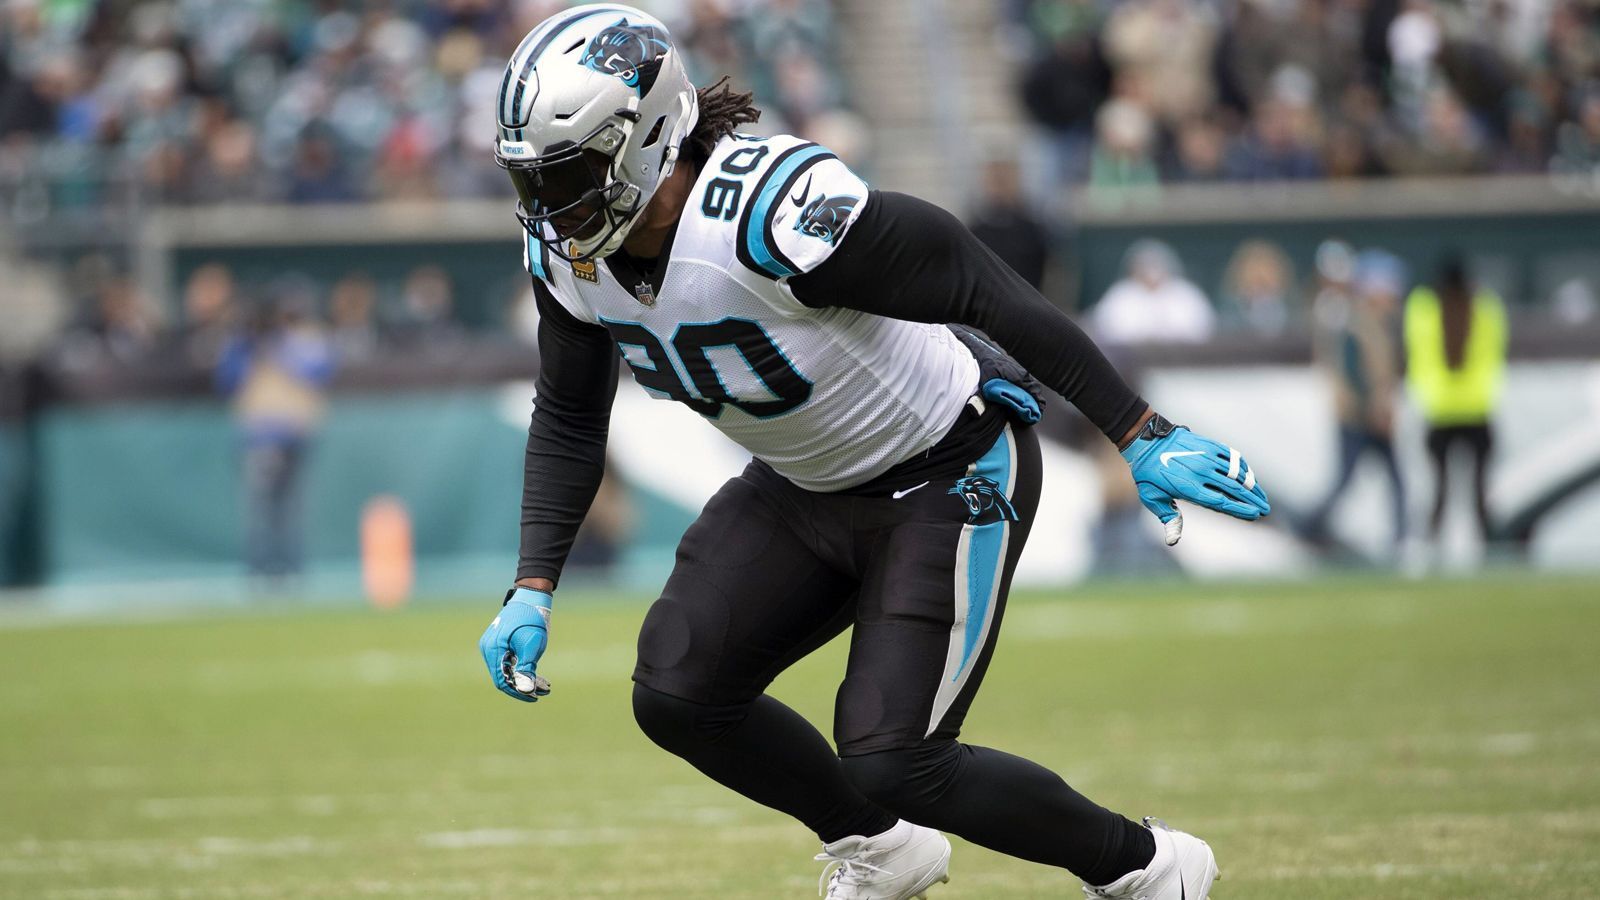 
                <strong>Carolina Panthers: Julius Peppers</strong><br>
                Position: Defensive End
              